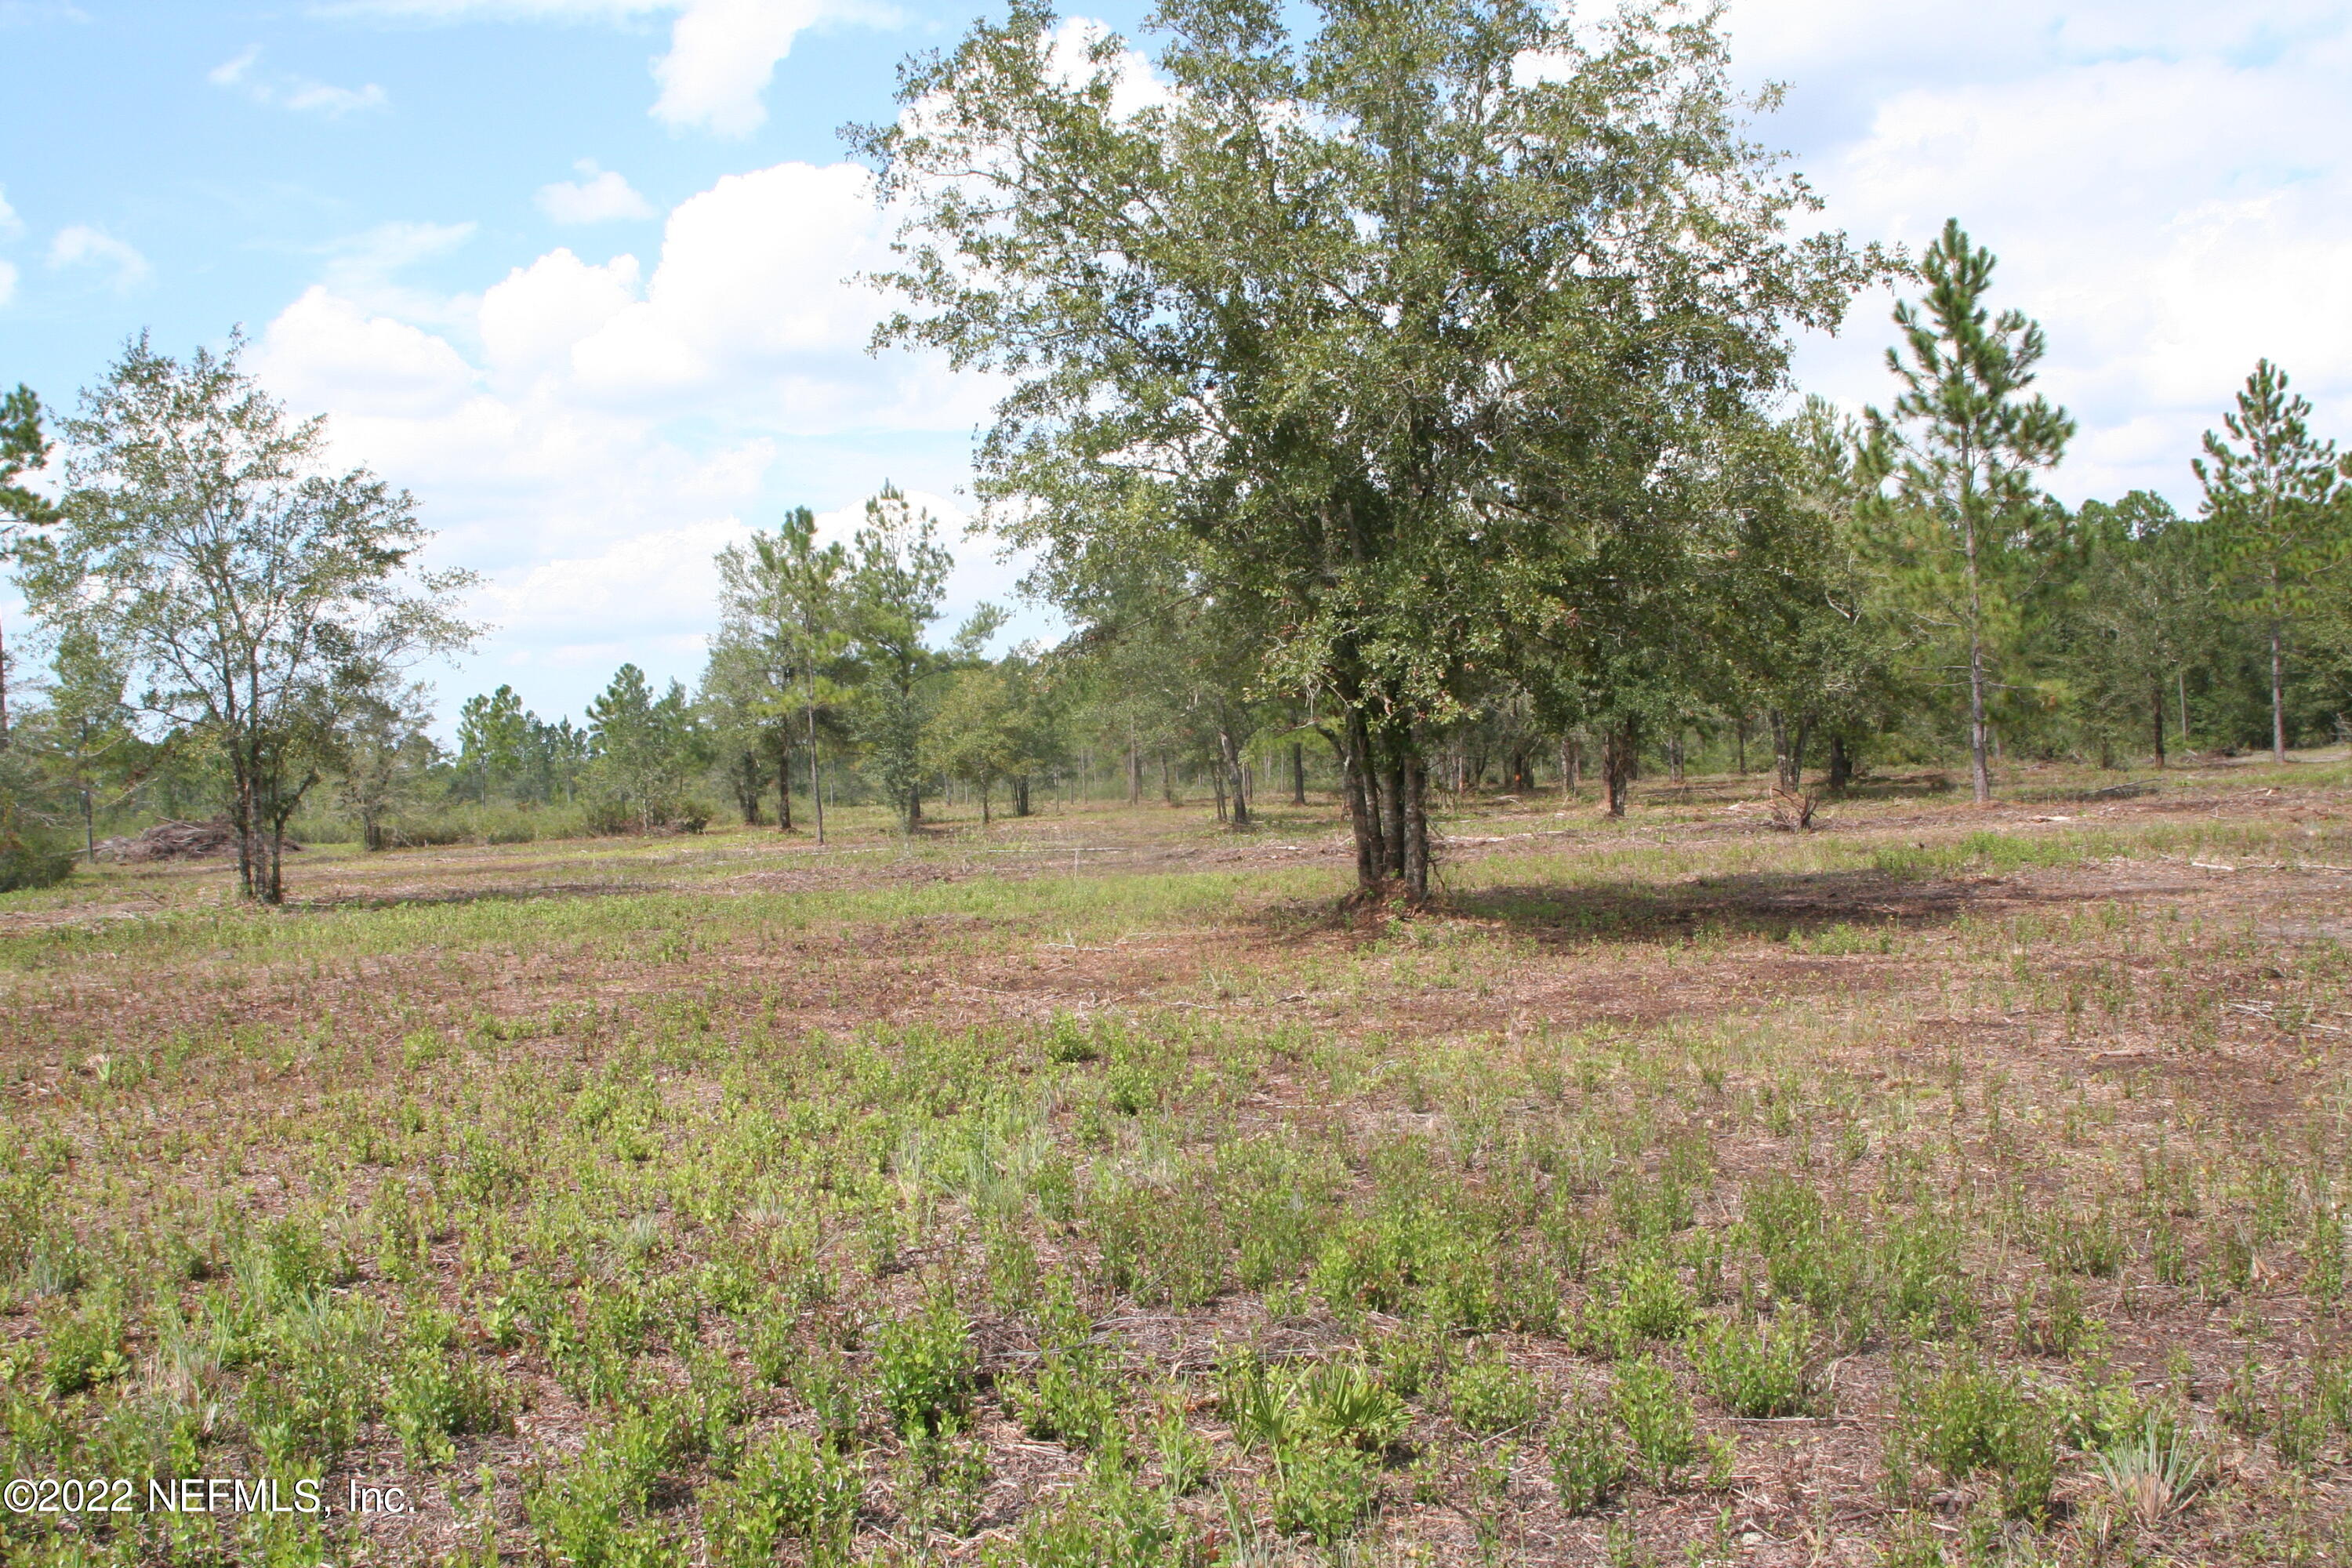 a view of dirt field with trees around